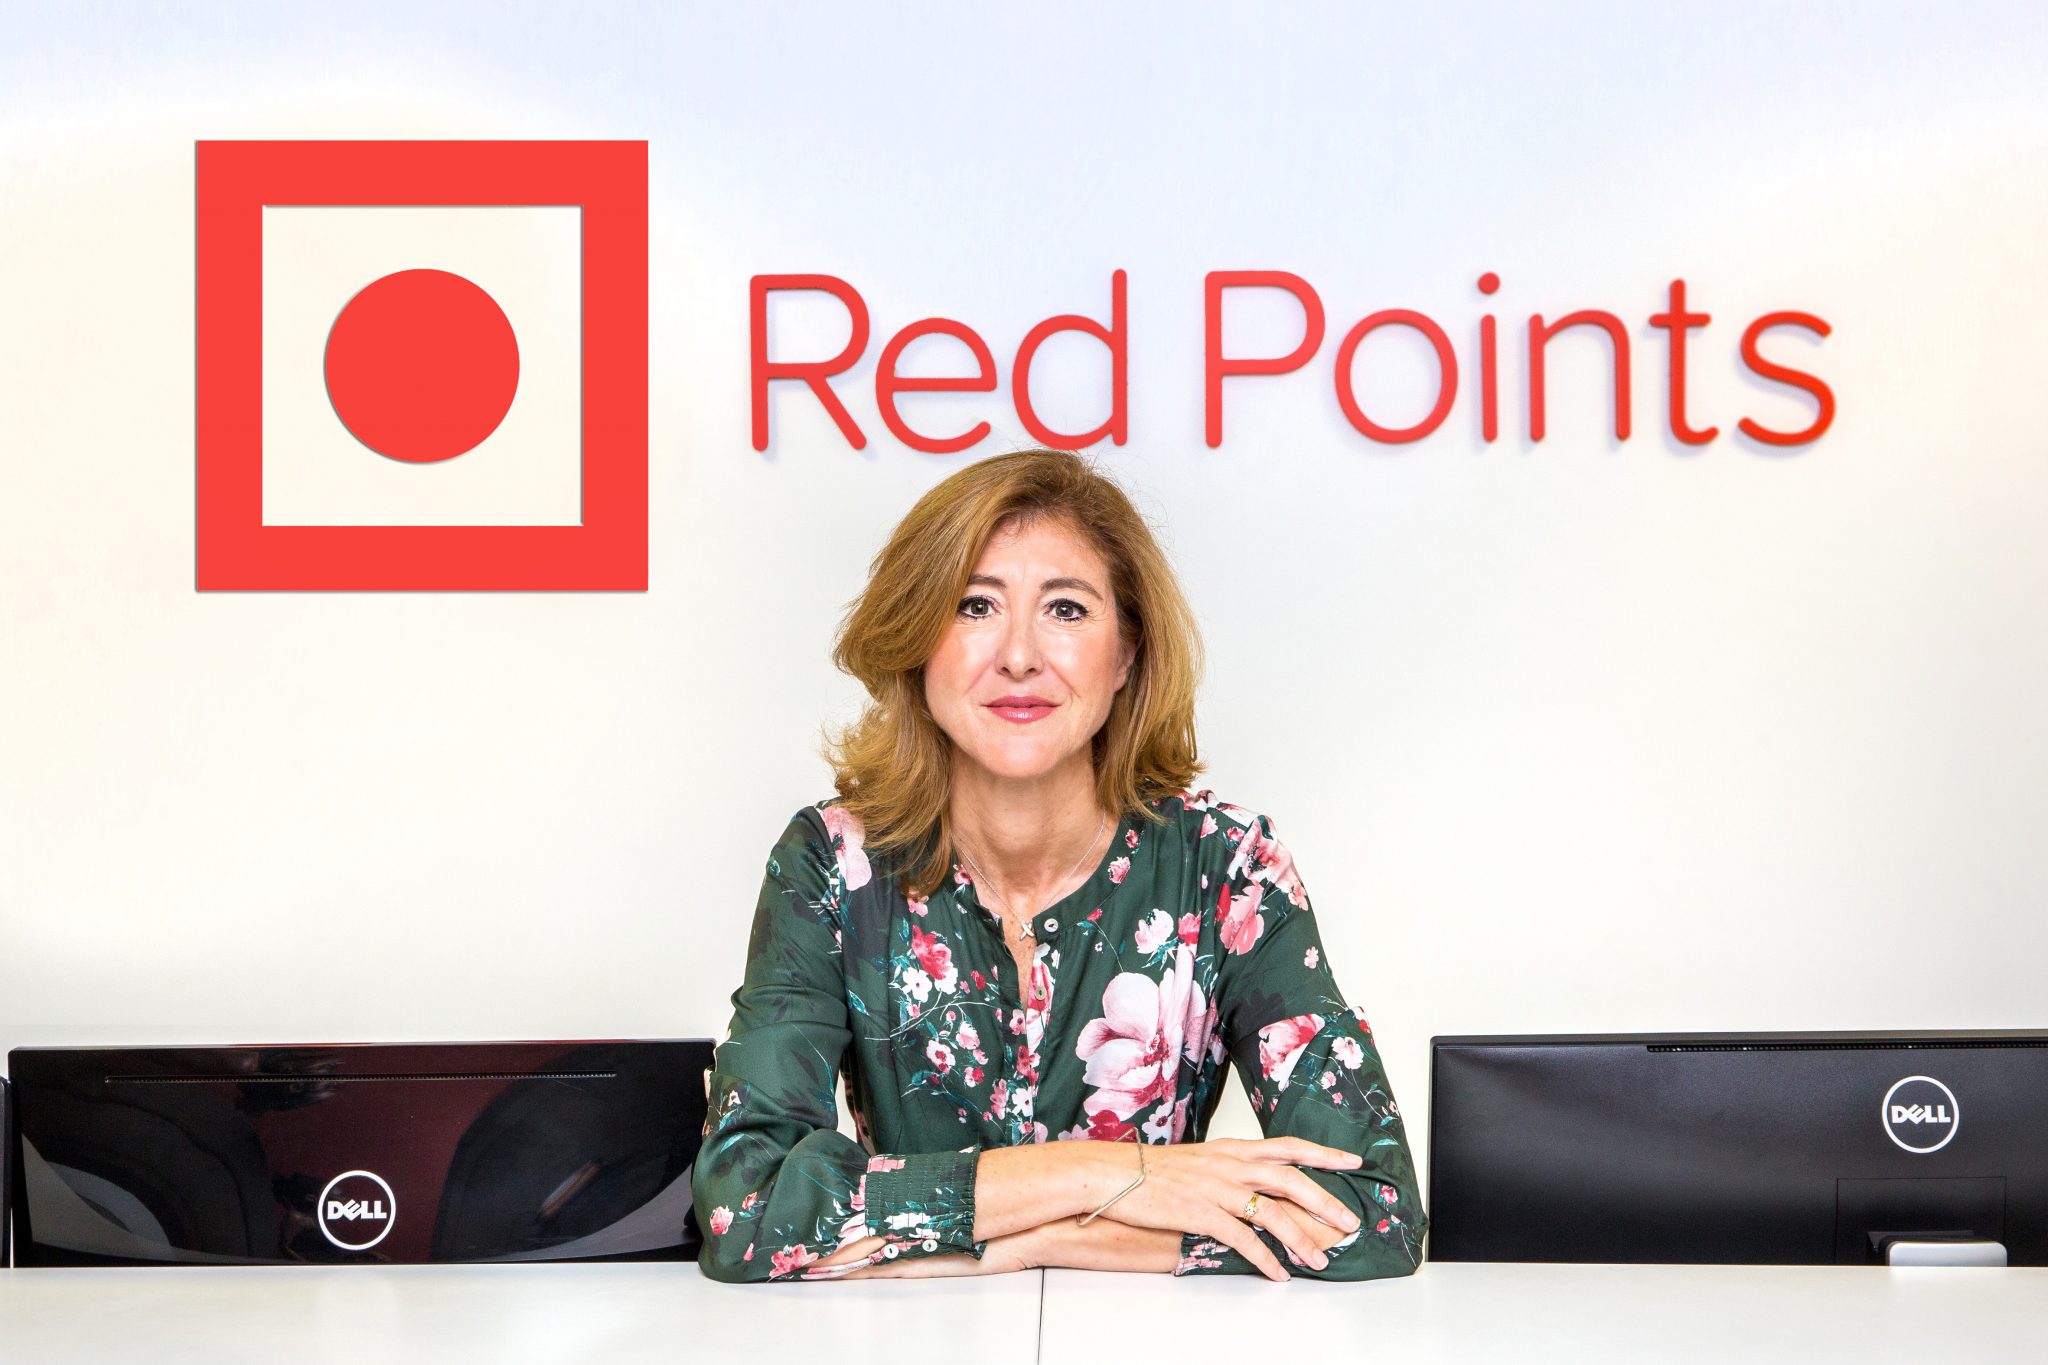 B2B Laura Urquizu, chief executive of Red Points